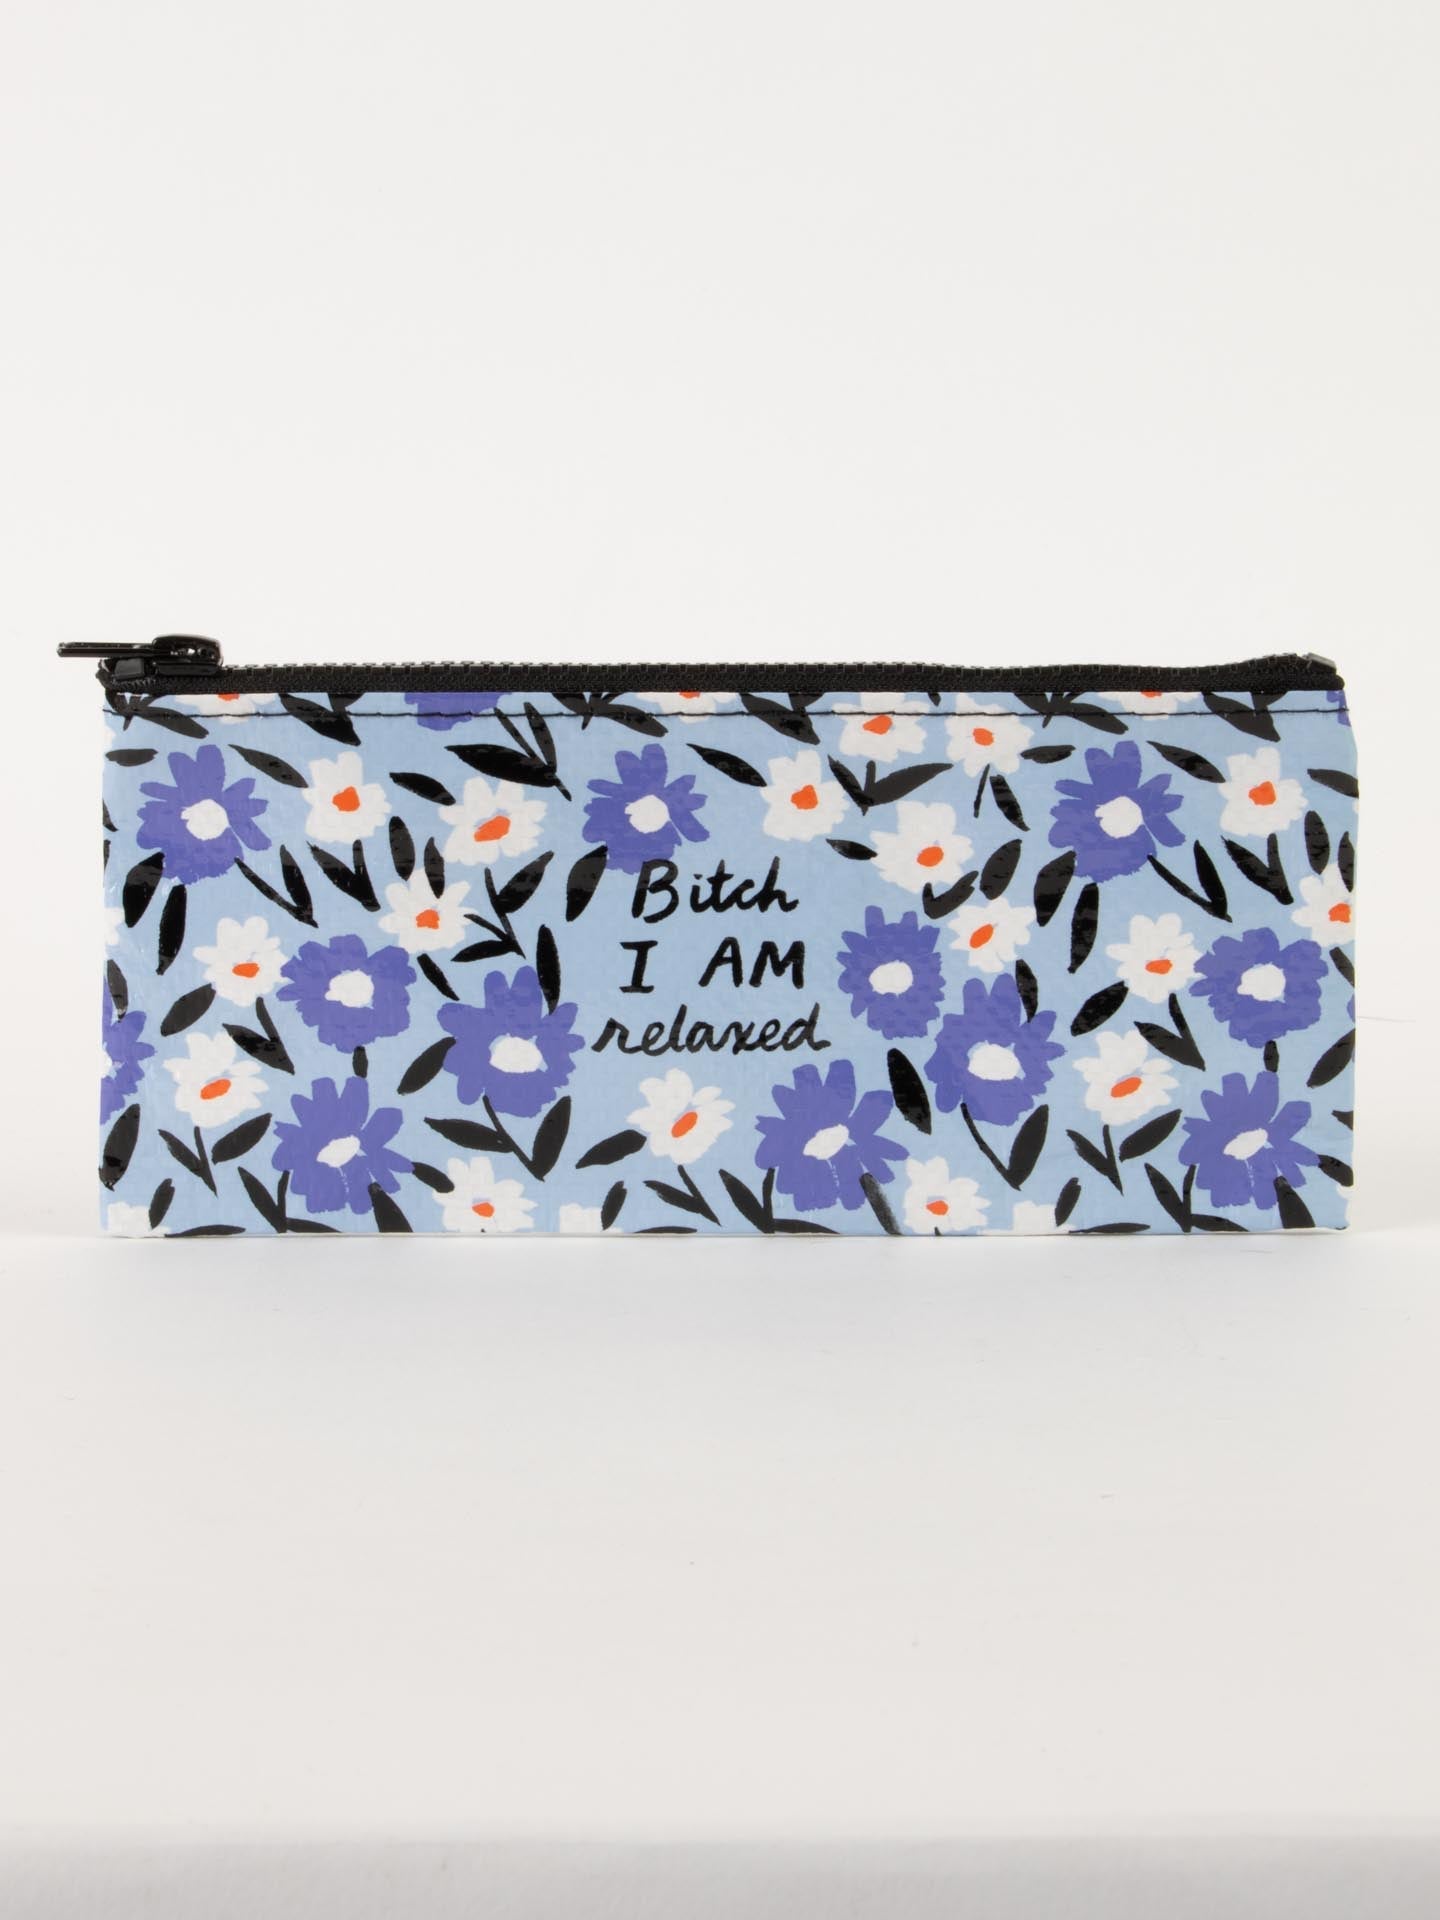 Bitch I am Relaxed Pencil Case